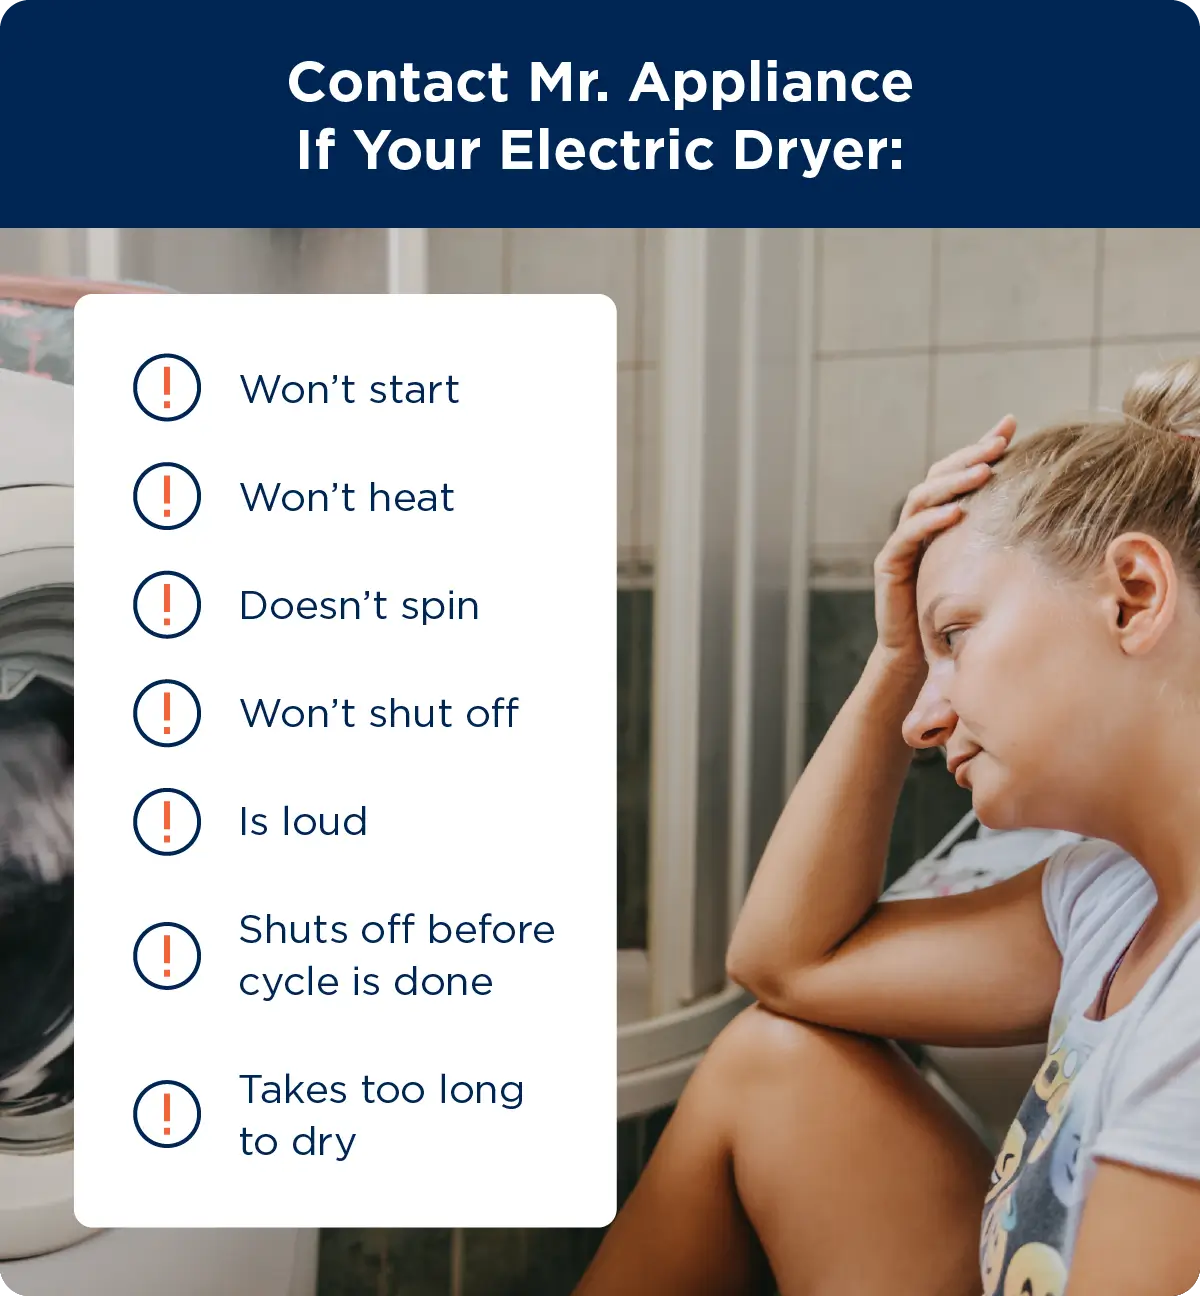 List of the electric dryer problems Mr. Appliance solves, such as the dryer not starting, not heating, not spinning, won’t shut off, is loud, shuts off before cycle is done, and takes too long to dry